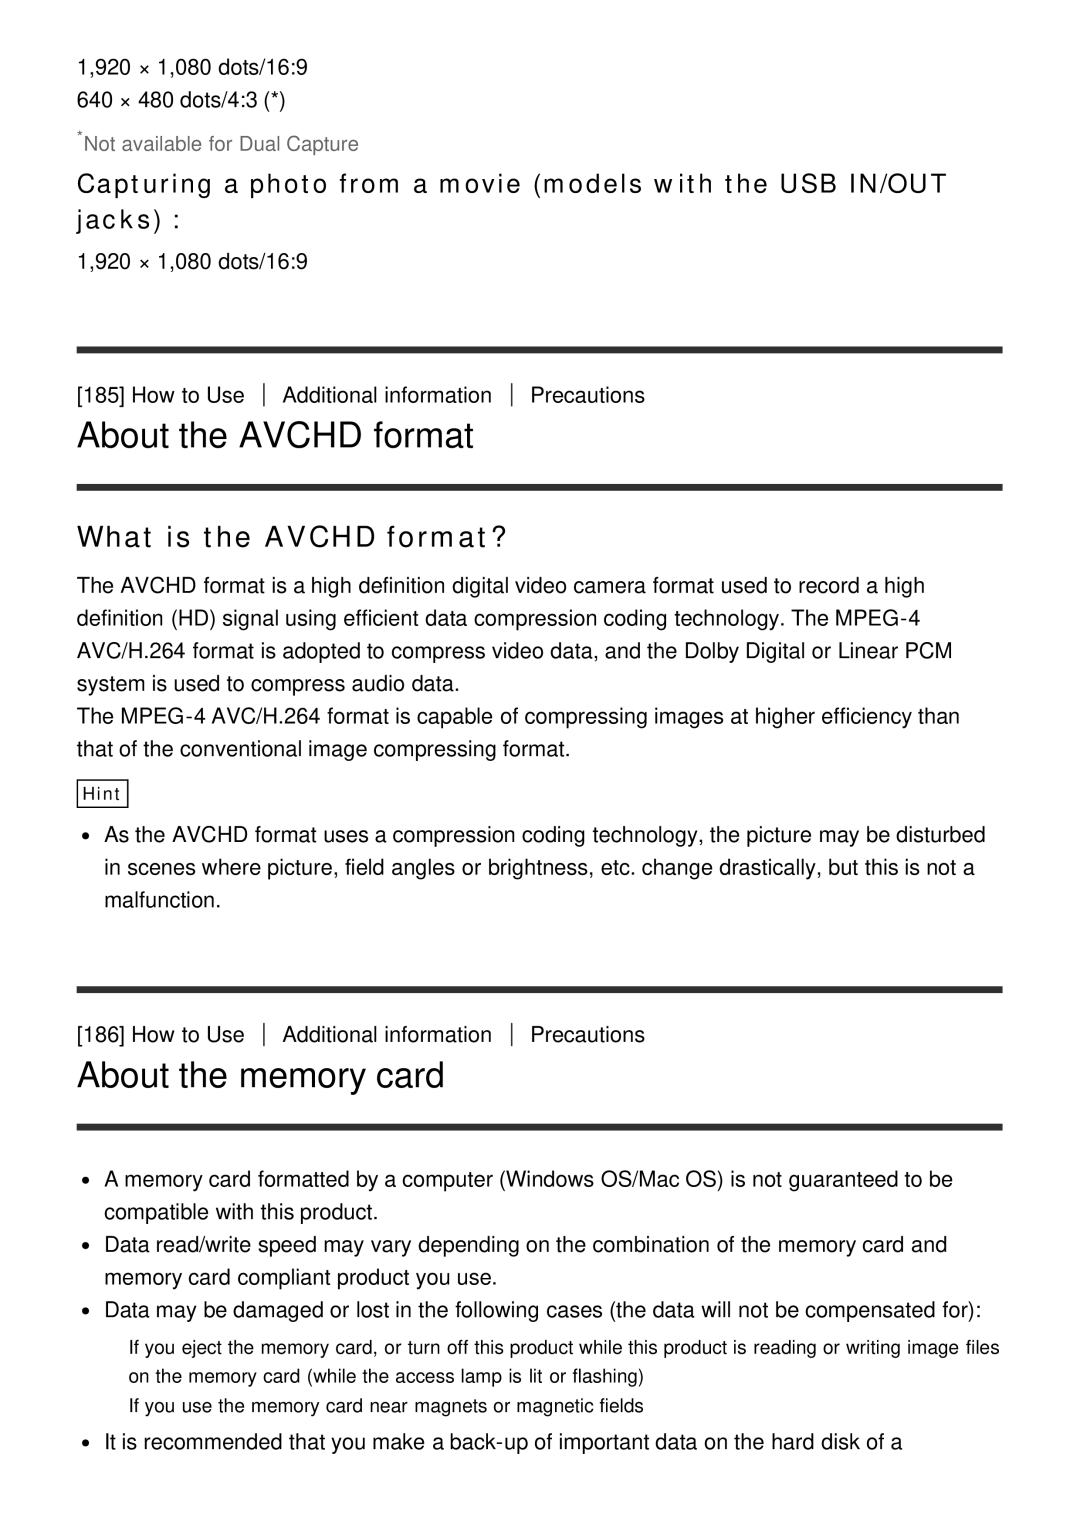 Sony HDR-CX900E, FDR-AX100E manual About the AVCHD format, About the memory card, What is the AVCHD format? 